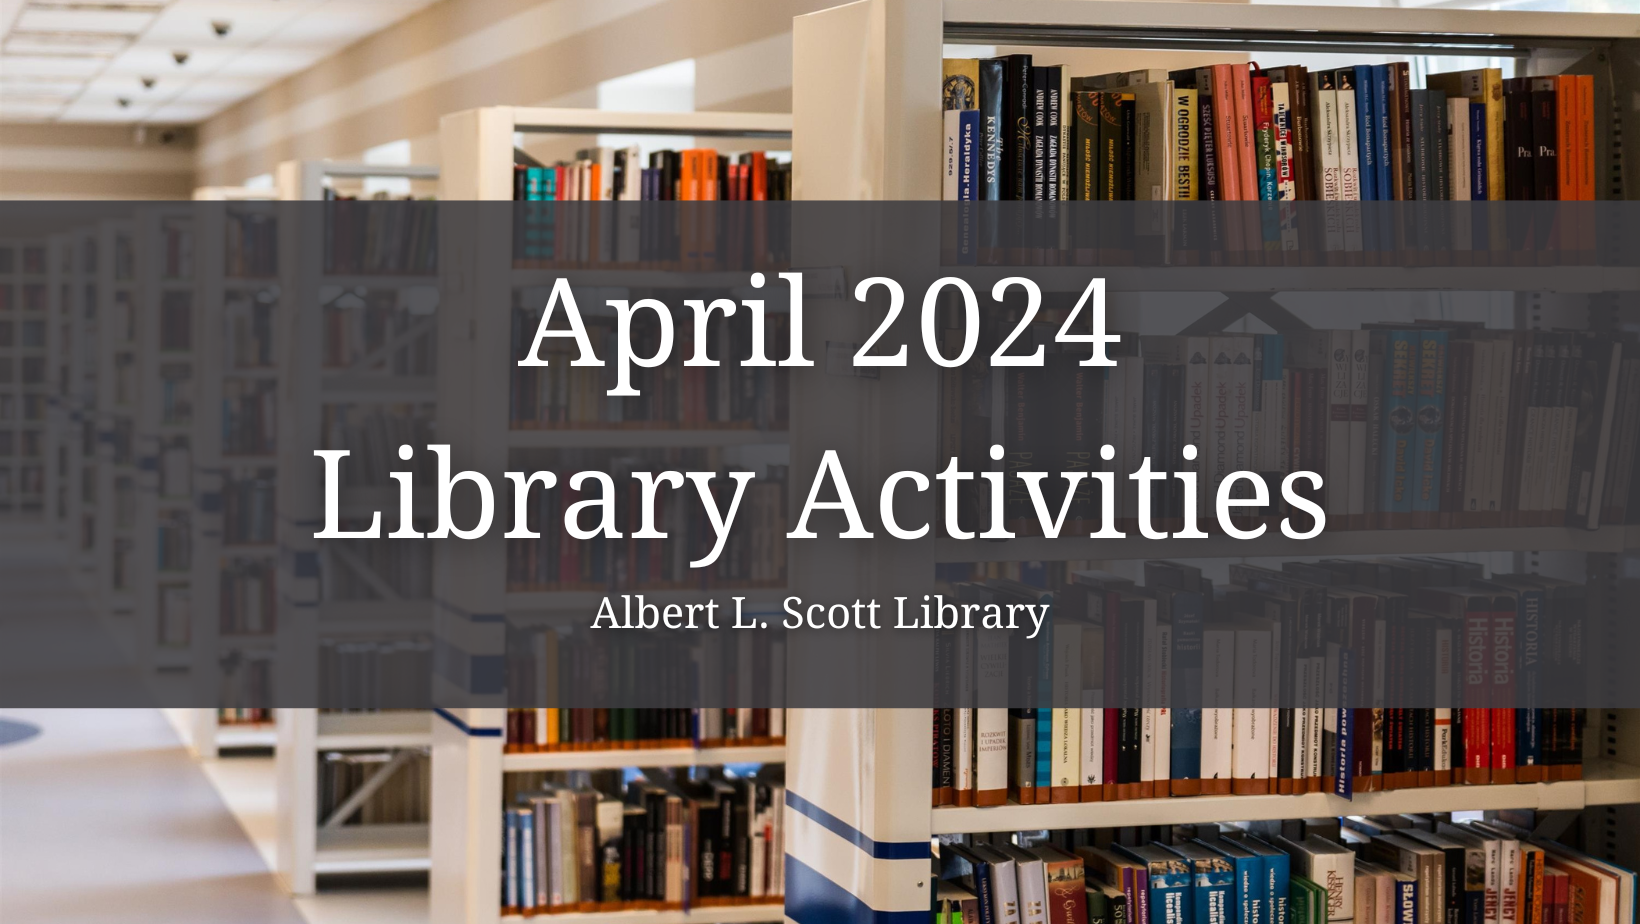 April Events at the Library